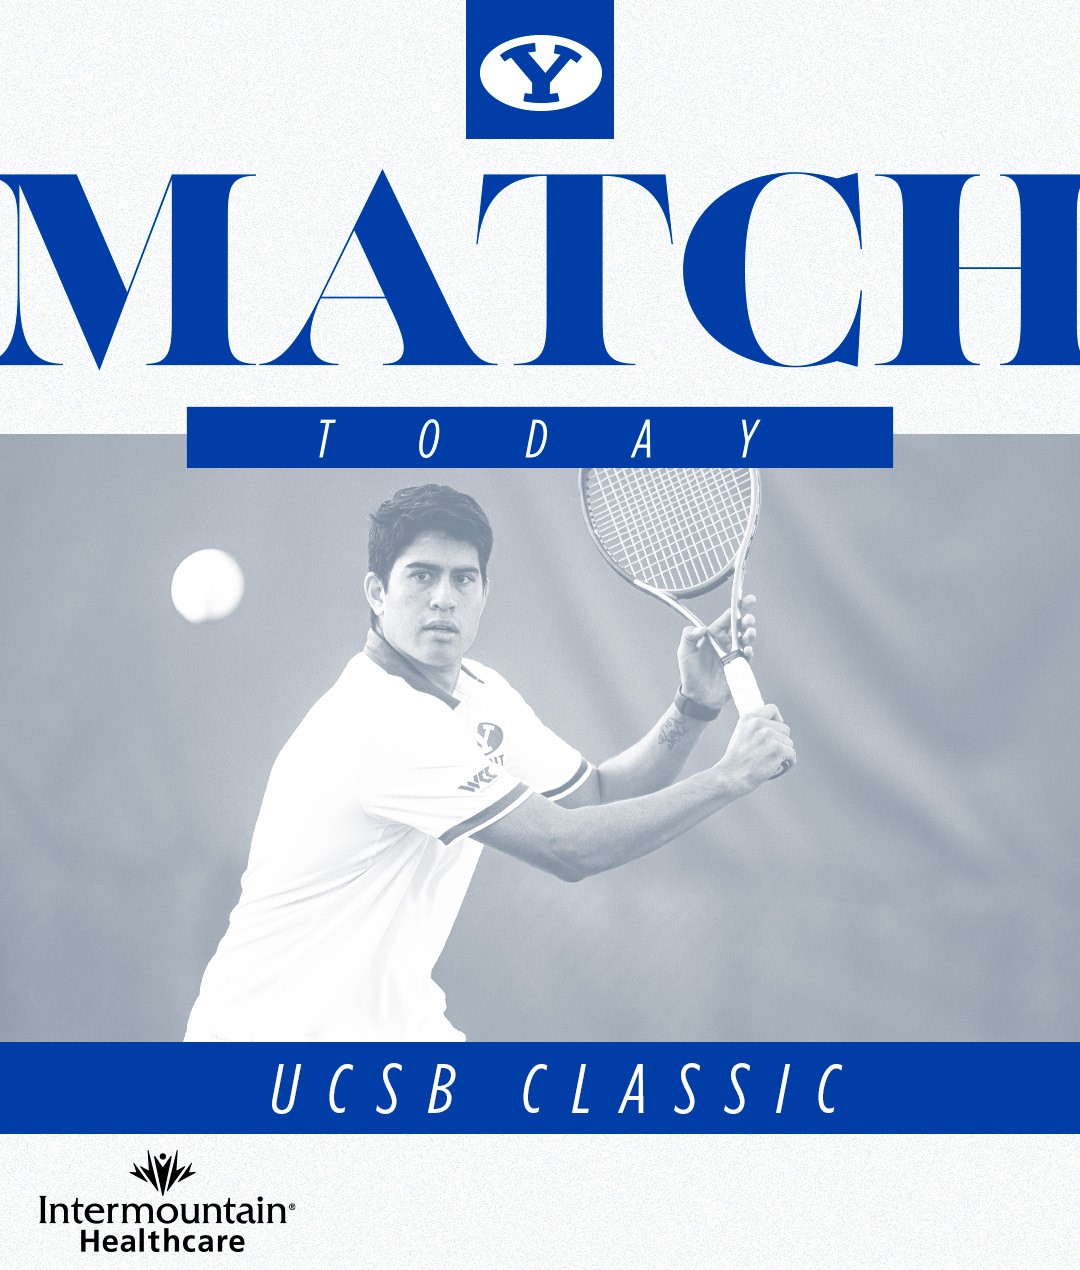 Graphic announcing the BYU men's tennis match at the UCSB Classic